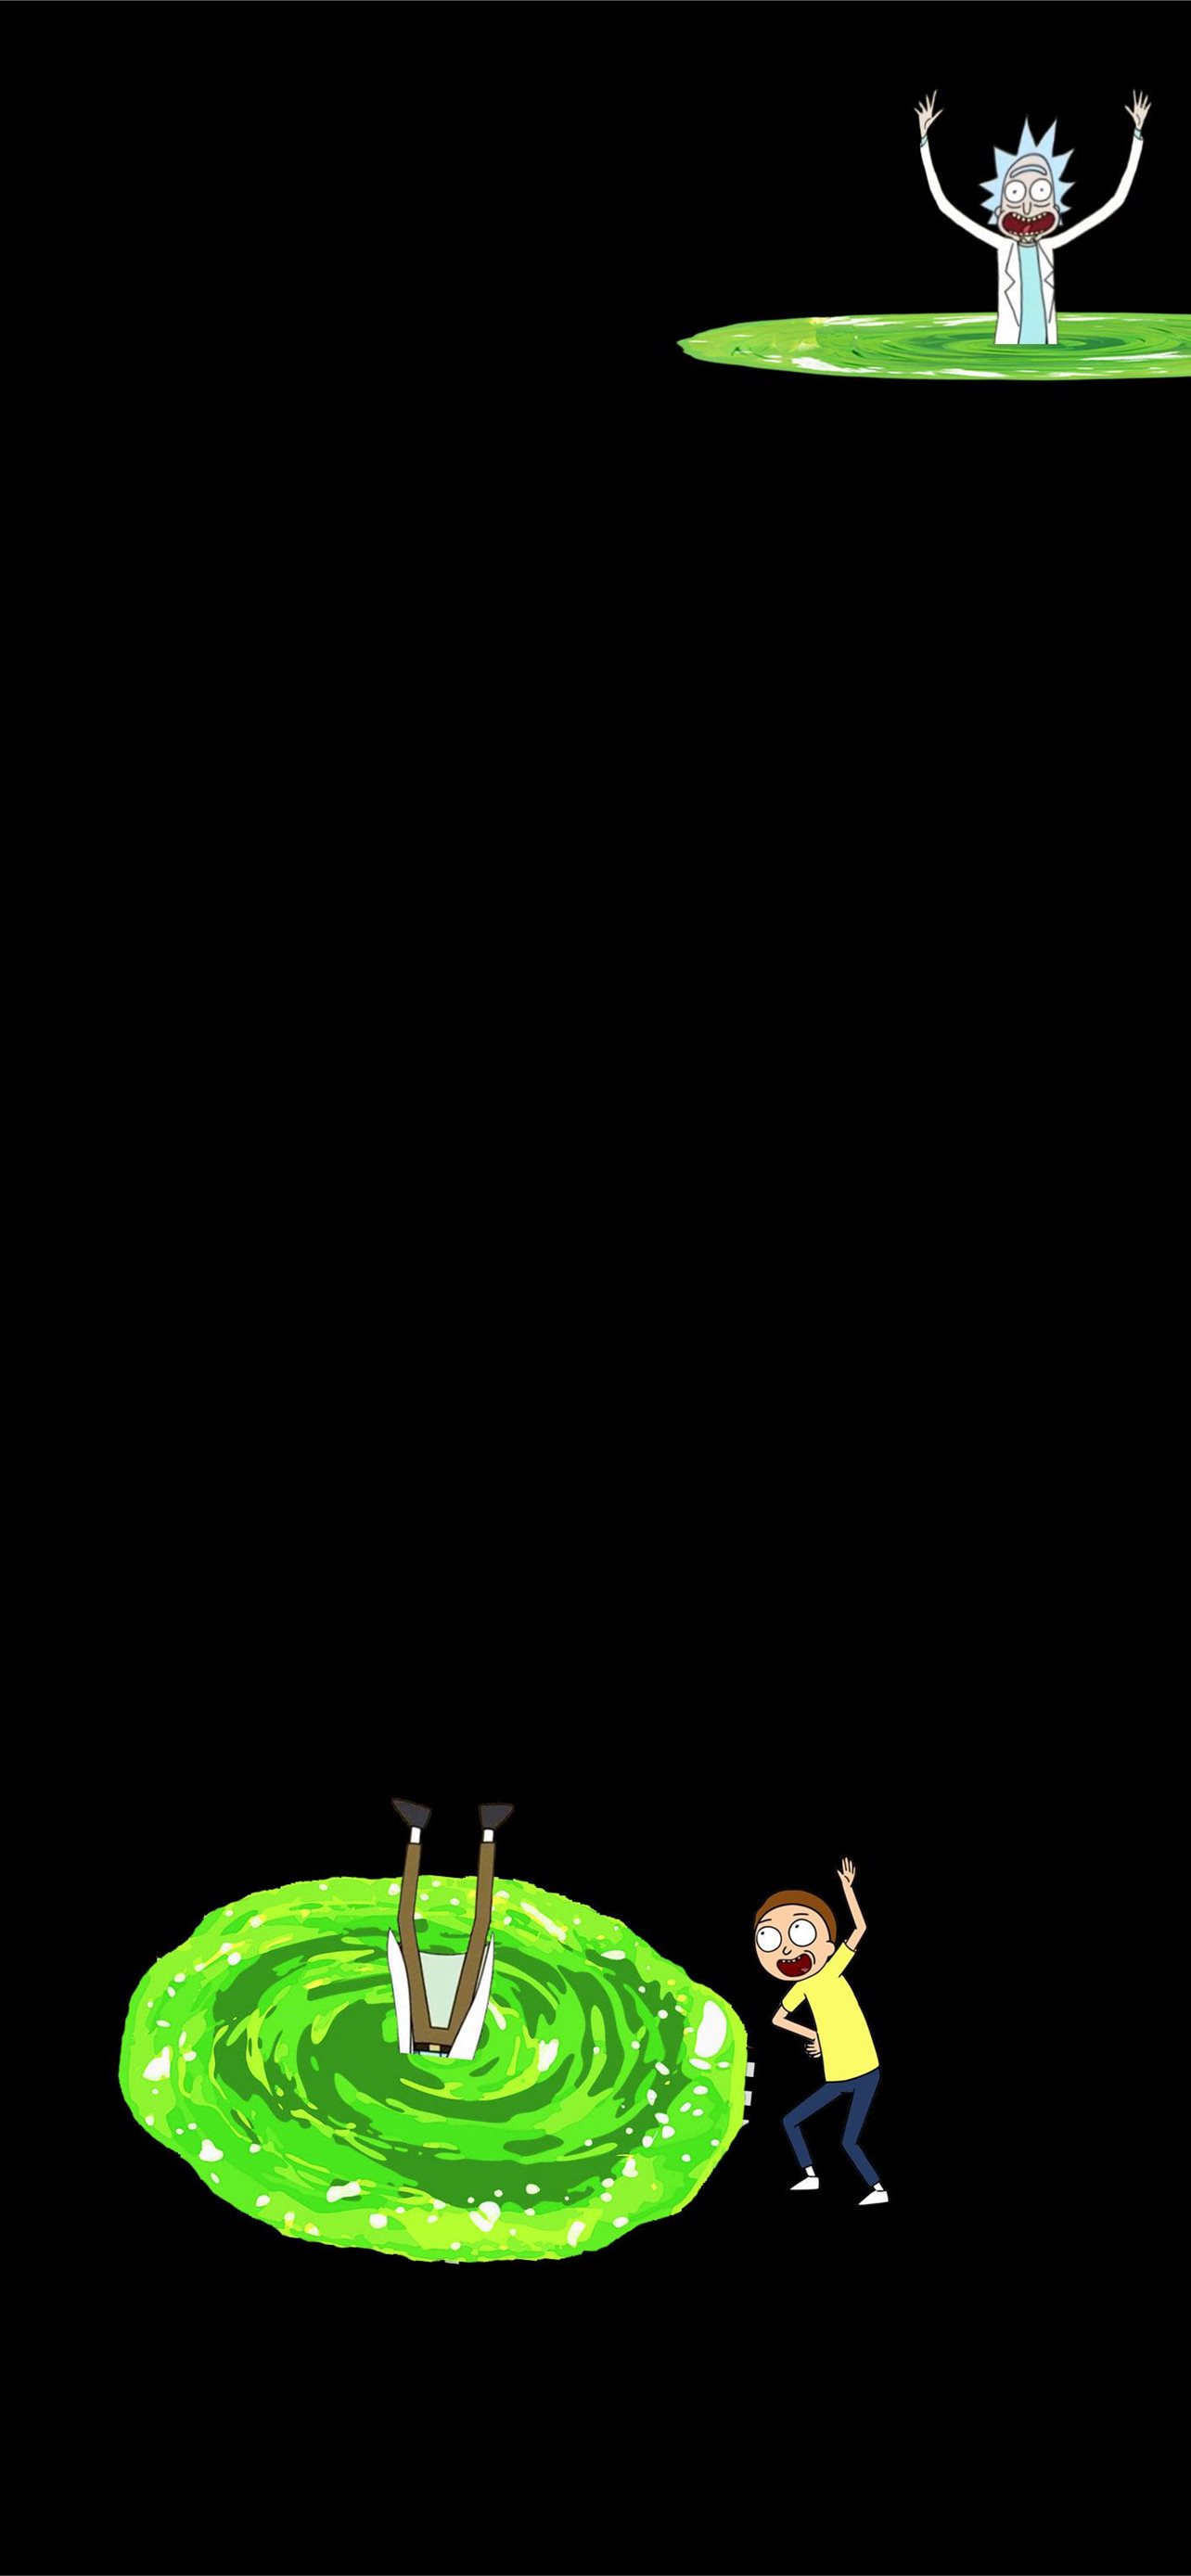 Rick and Morty Portal 2 by ScubaRJ Galaxy S10 Hole. iPhone Wallpaper Free Download